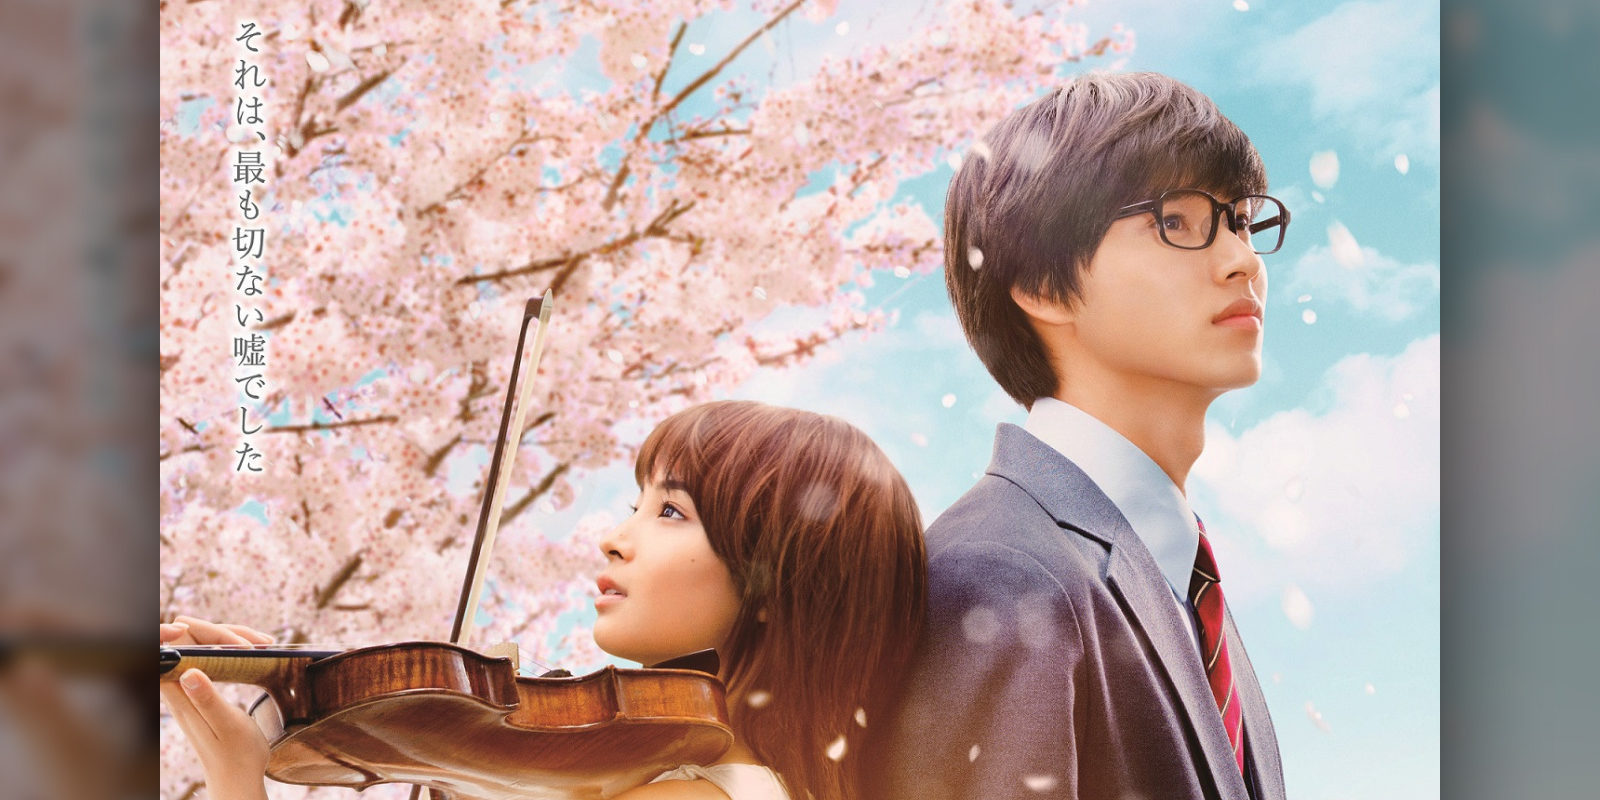 your lie in april live action download